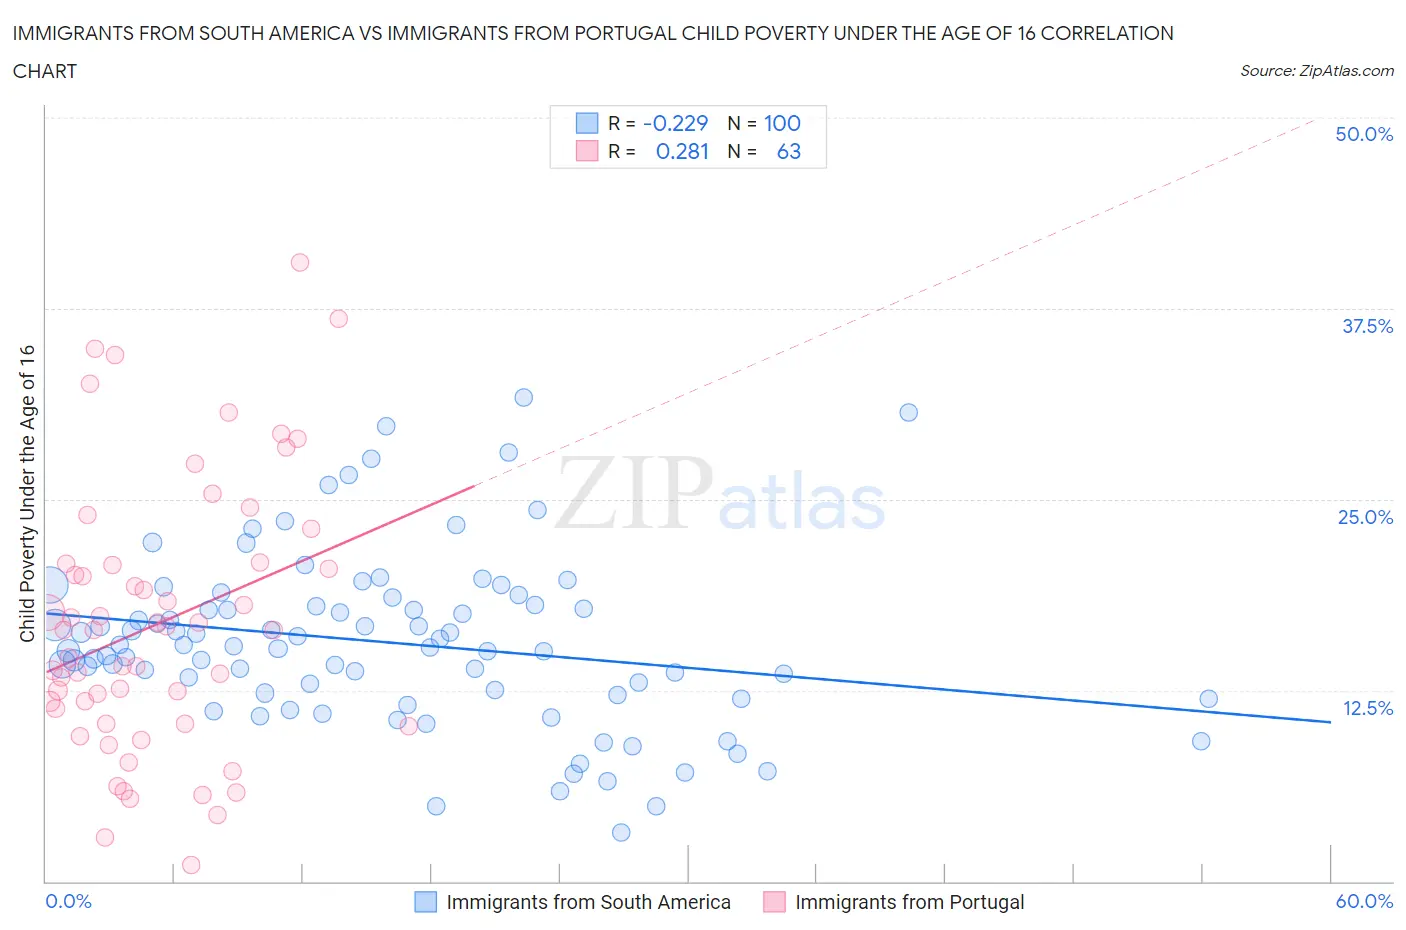 Immigrants from South America vs Immigrants from Portugal Child Poverty Under the Age of 16